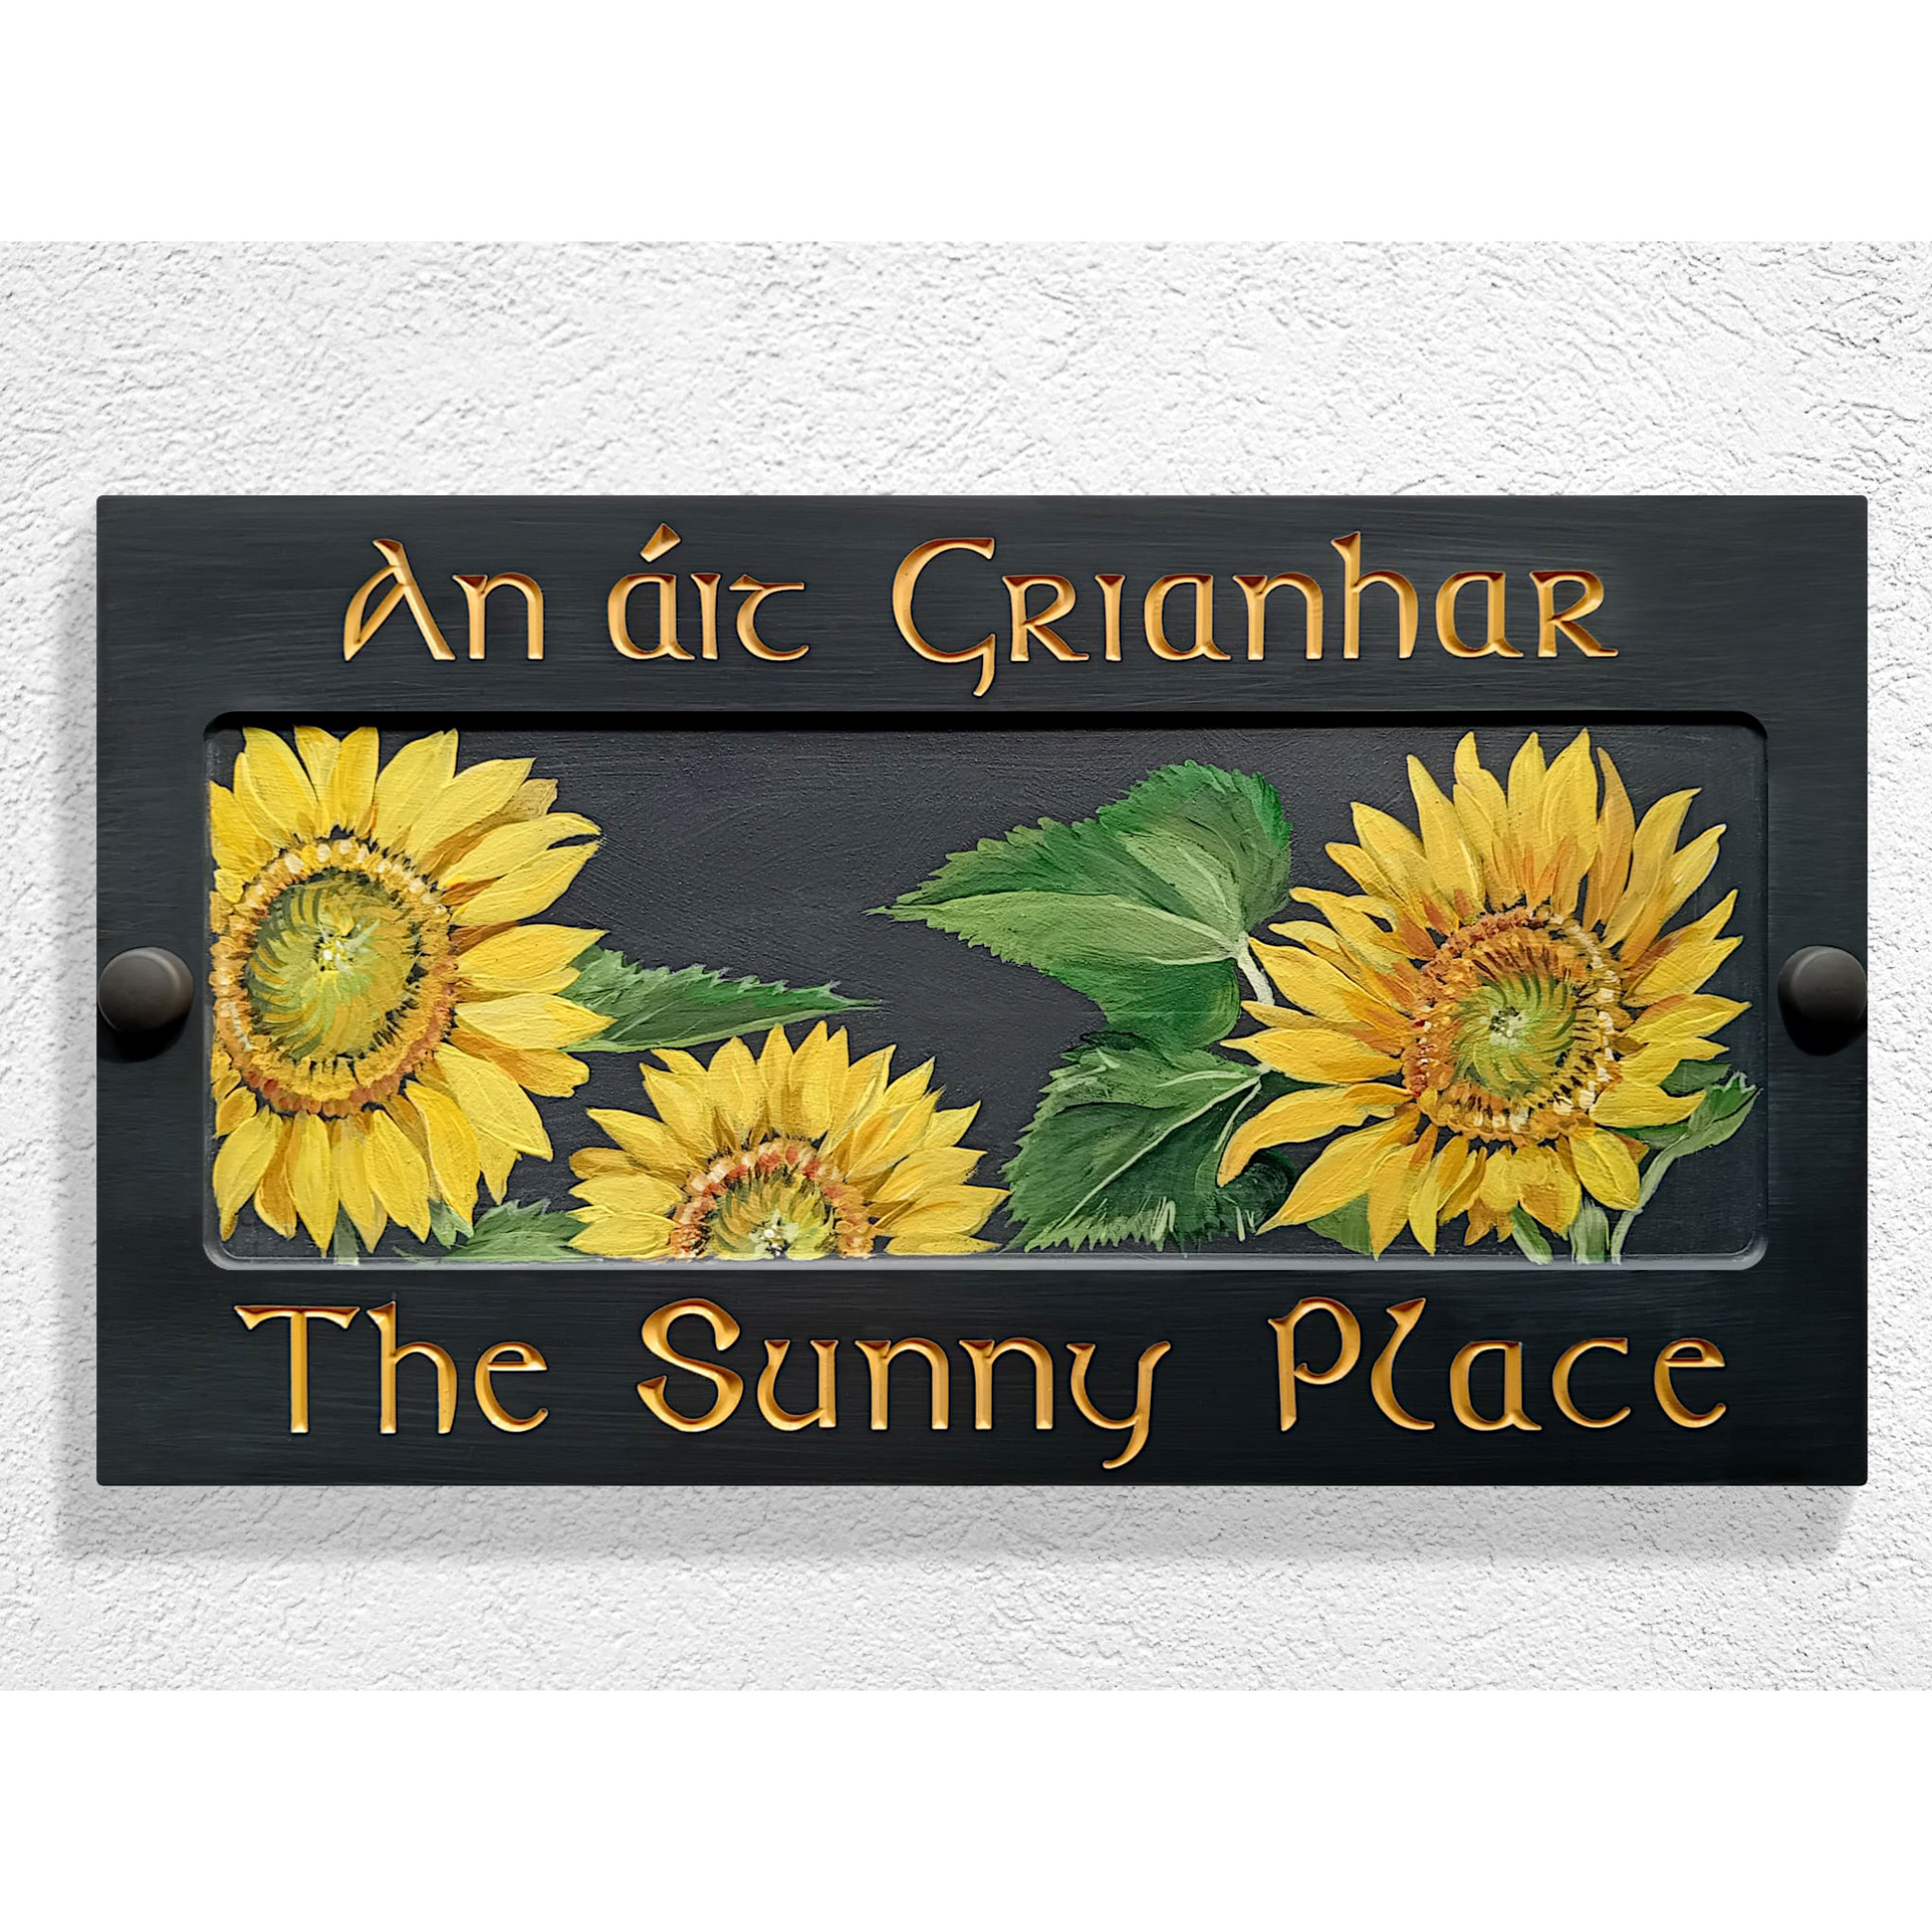 Grey Large Rectangle Corian Sign (325x80mm) with Sunflower Art